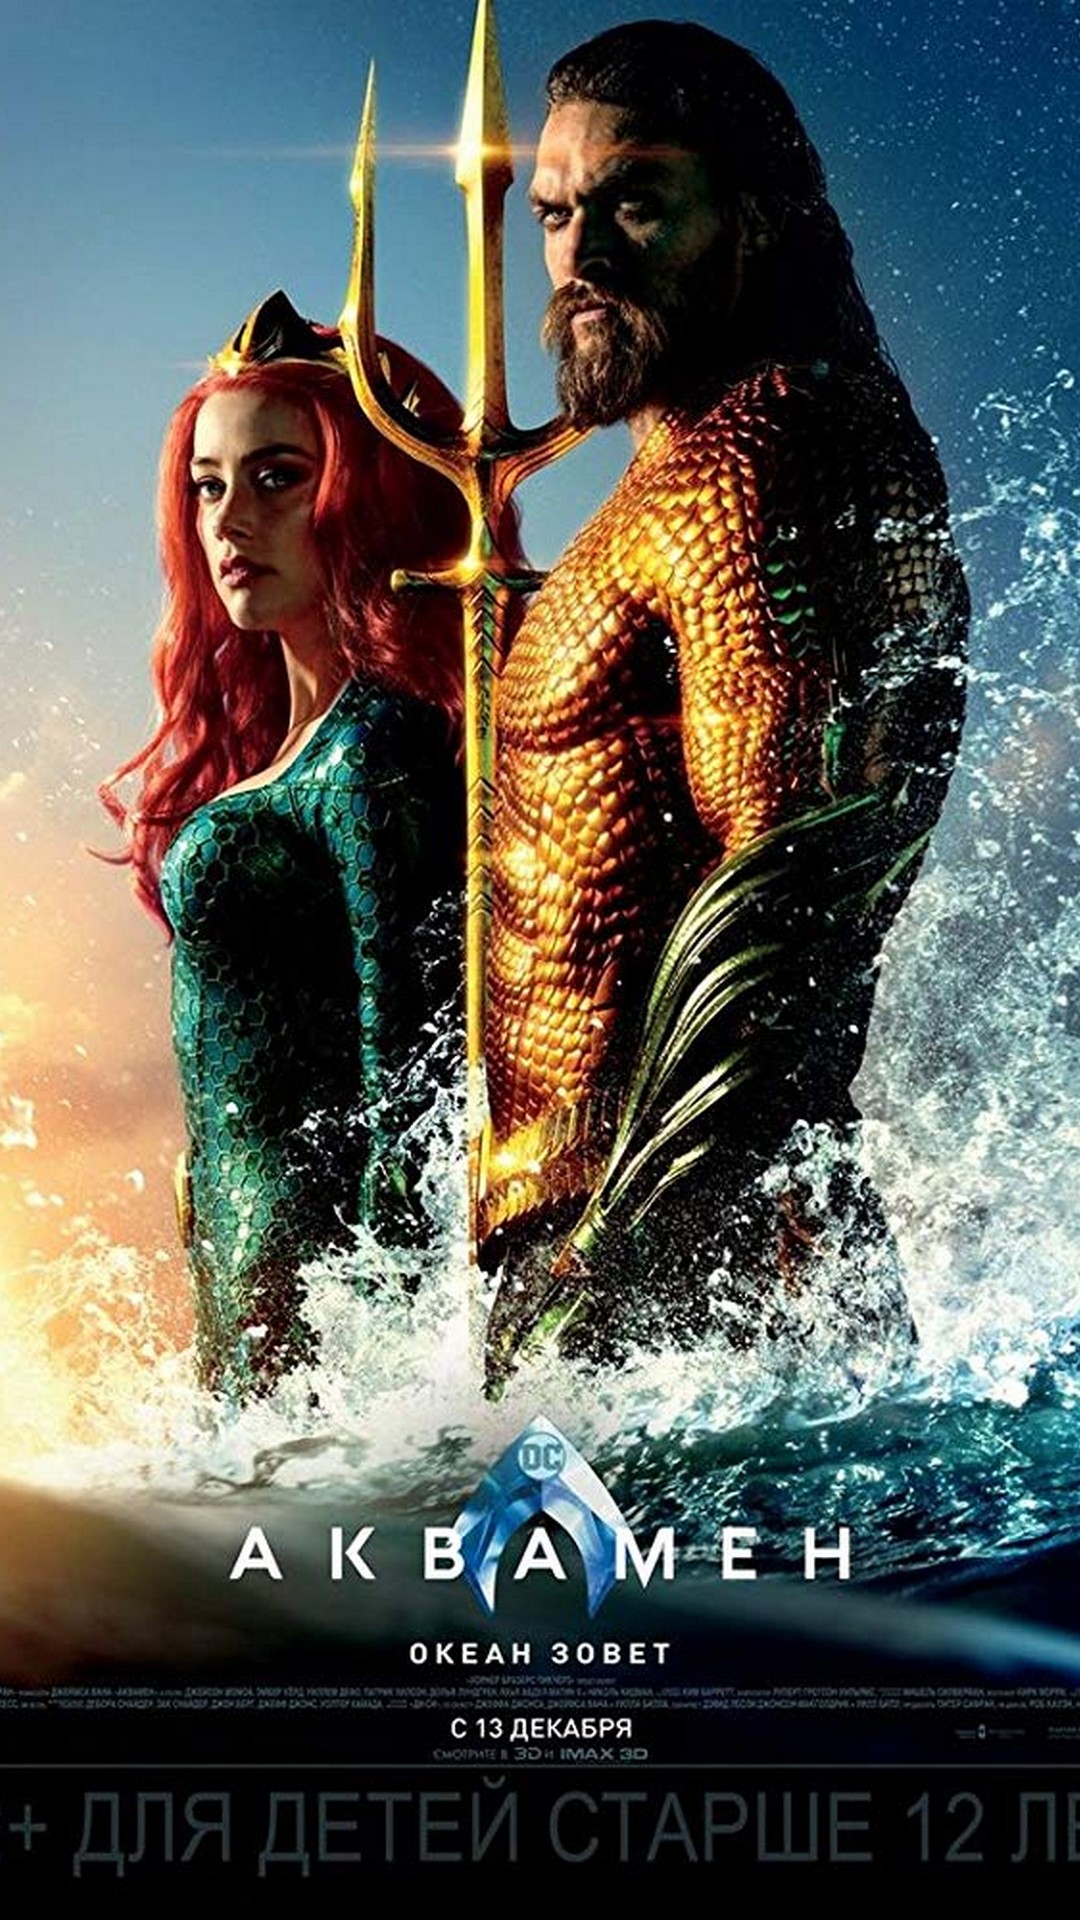 Aquaman 2018 Wallpaper For Phone With Resolution 1080X1920 pixel. You can make this wallpaper for your Desktop Computer Backgrounds, Mac Wallpapers, Android Lock screen or iPhone Screensavers